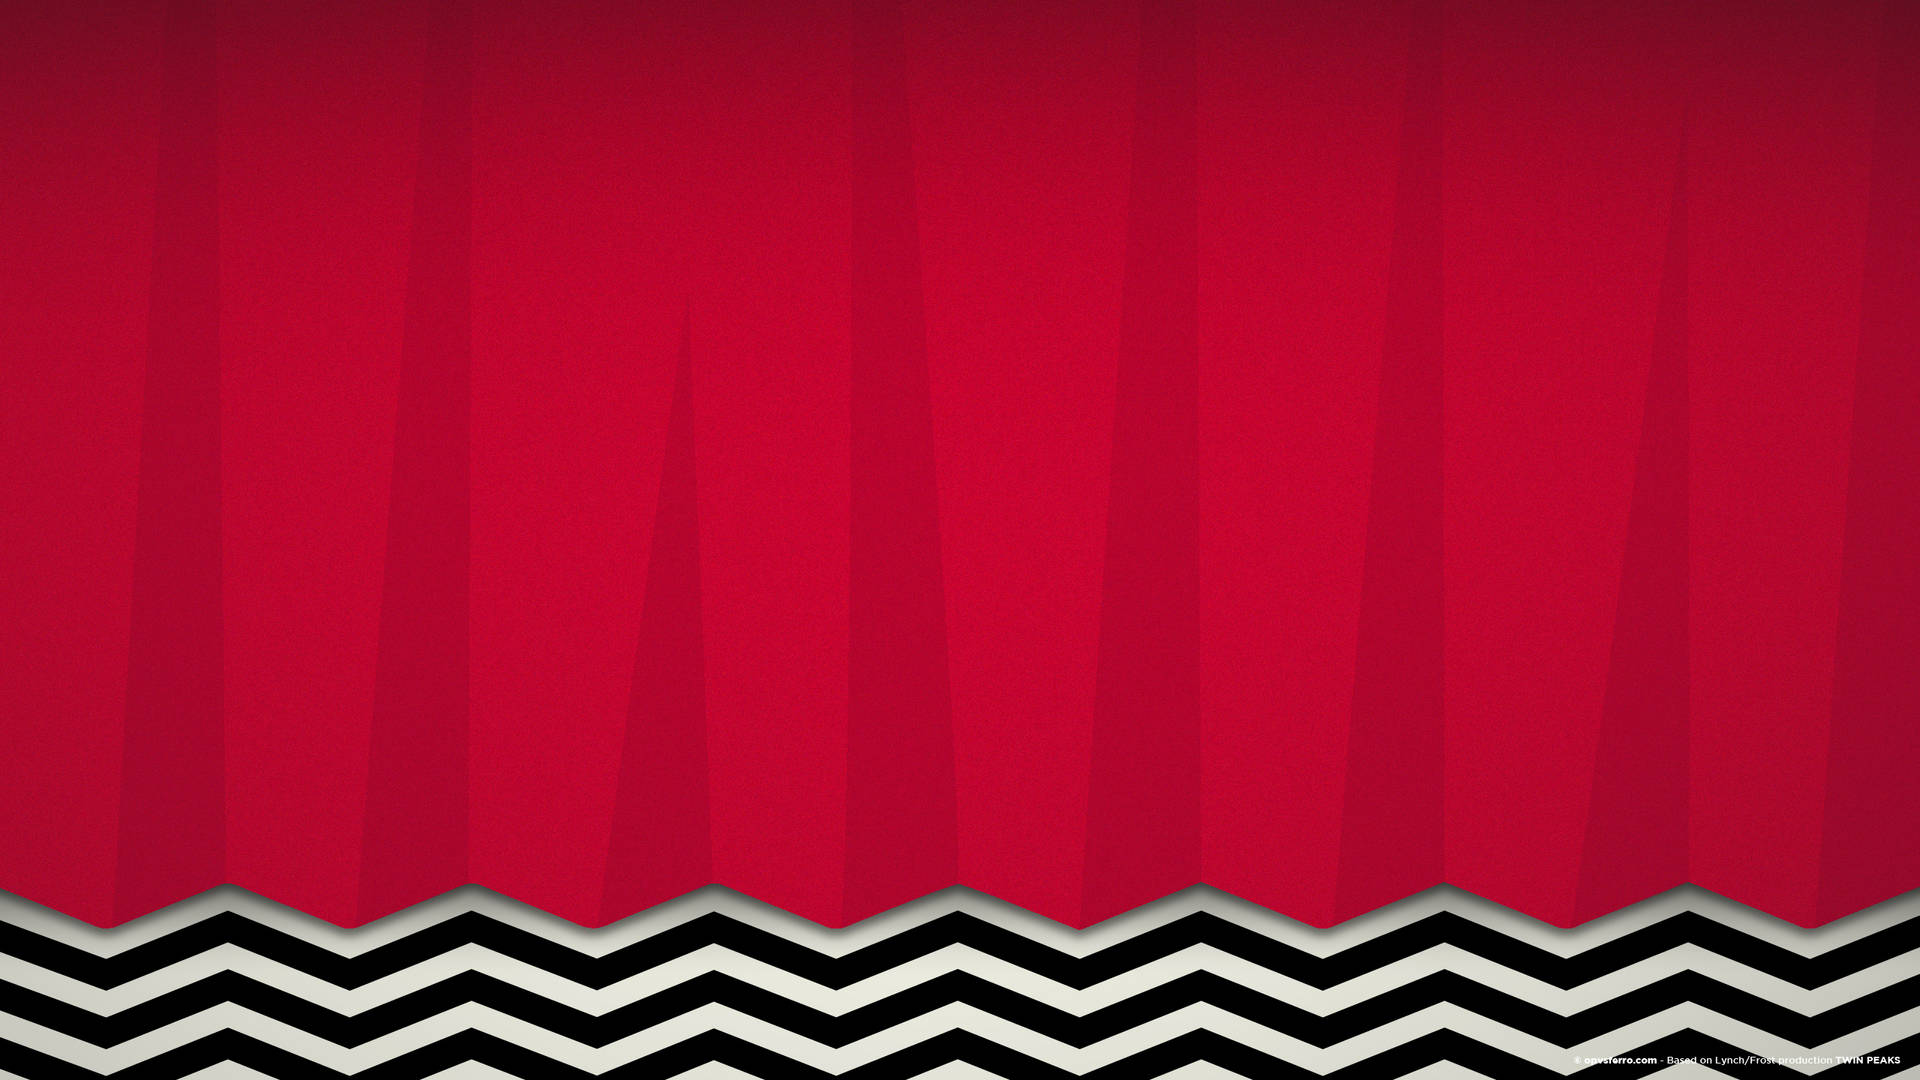 A Red And Black Chevron Pattern Wallpaper Background